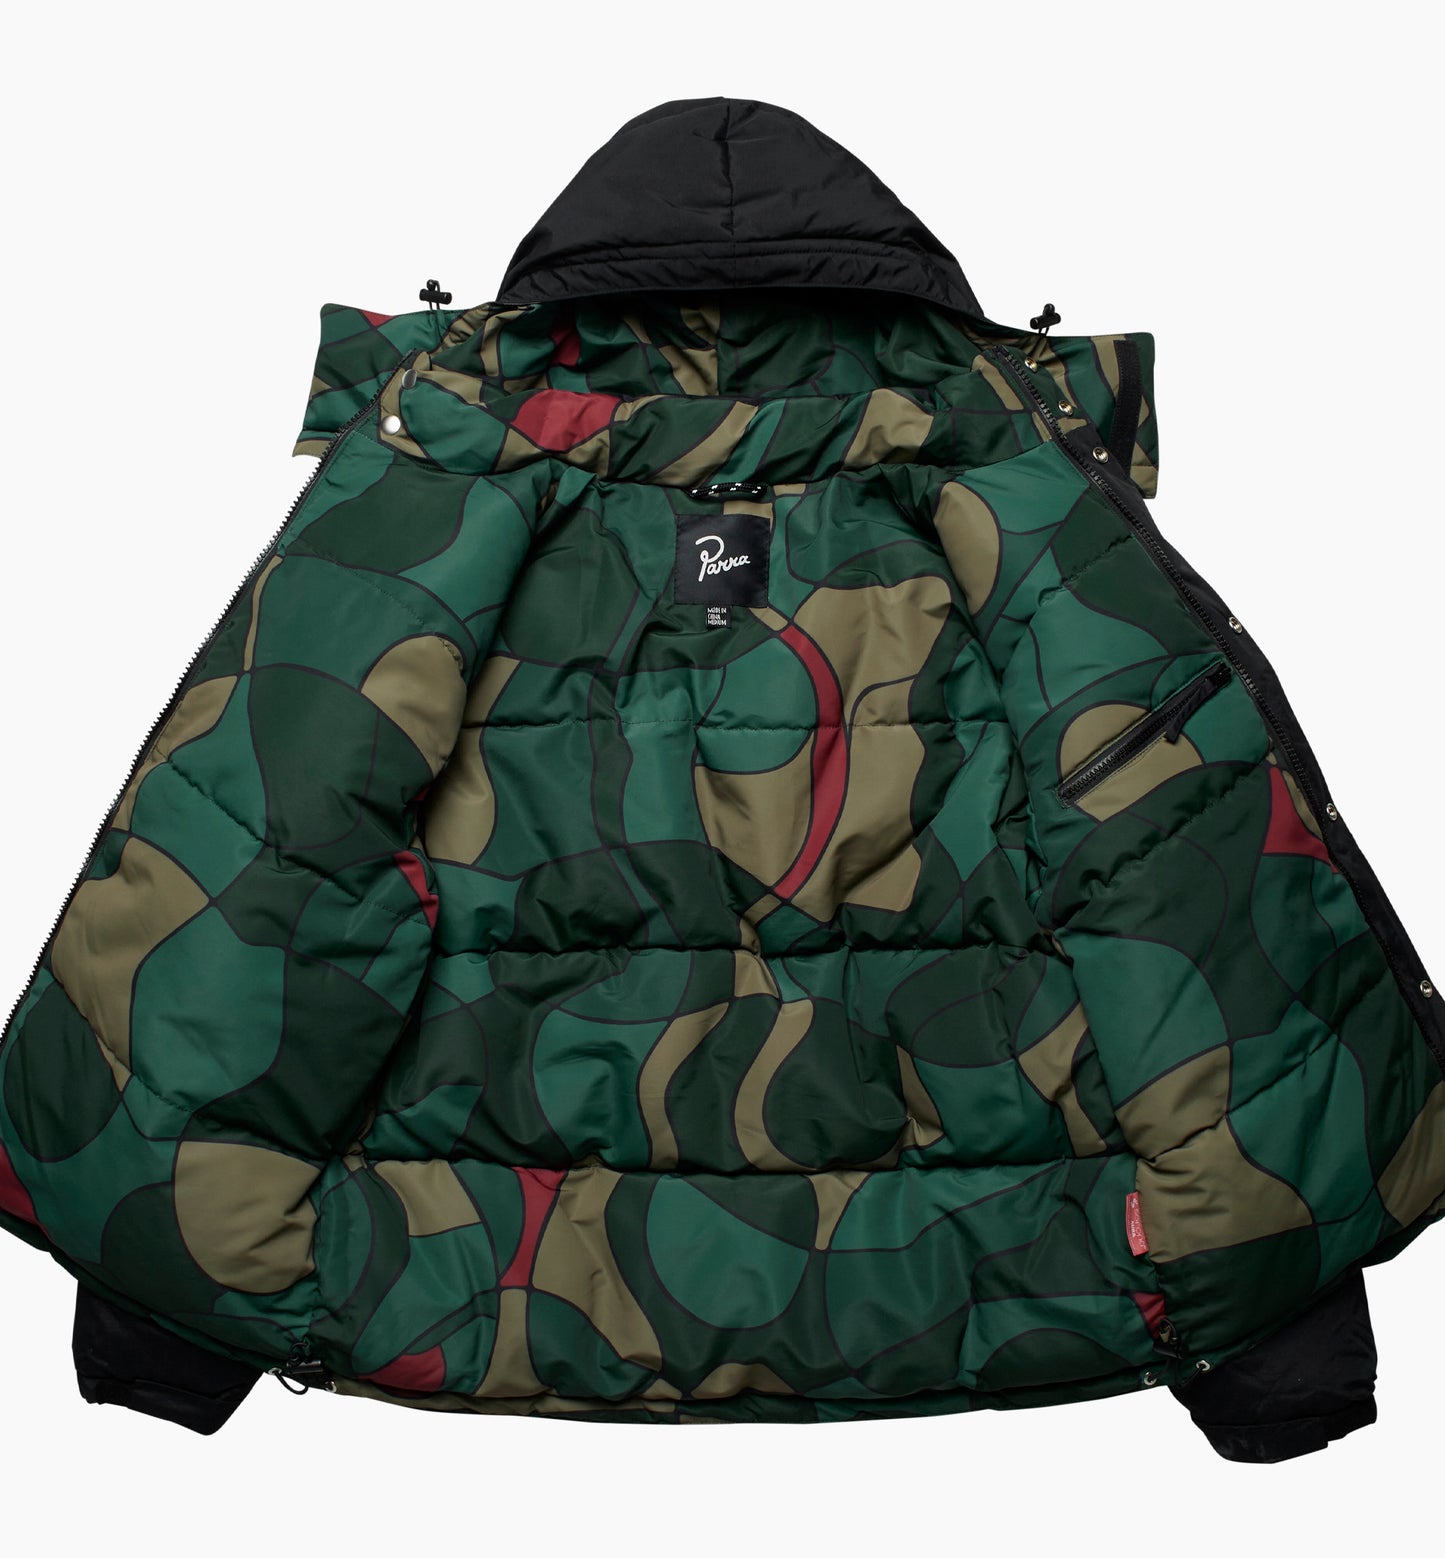 By Parra Trees In Wind Puffer Jacket Black